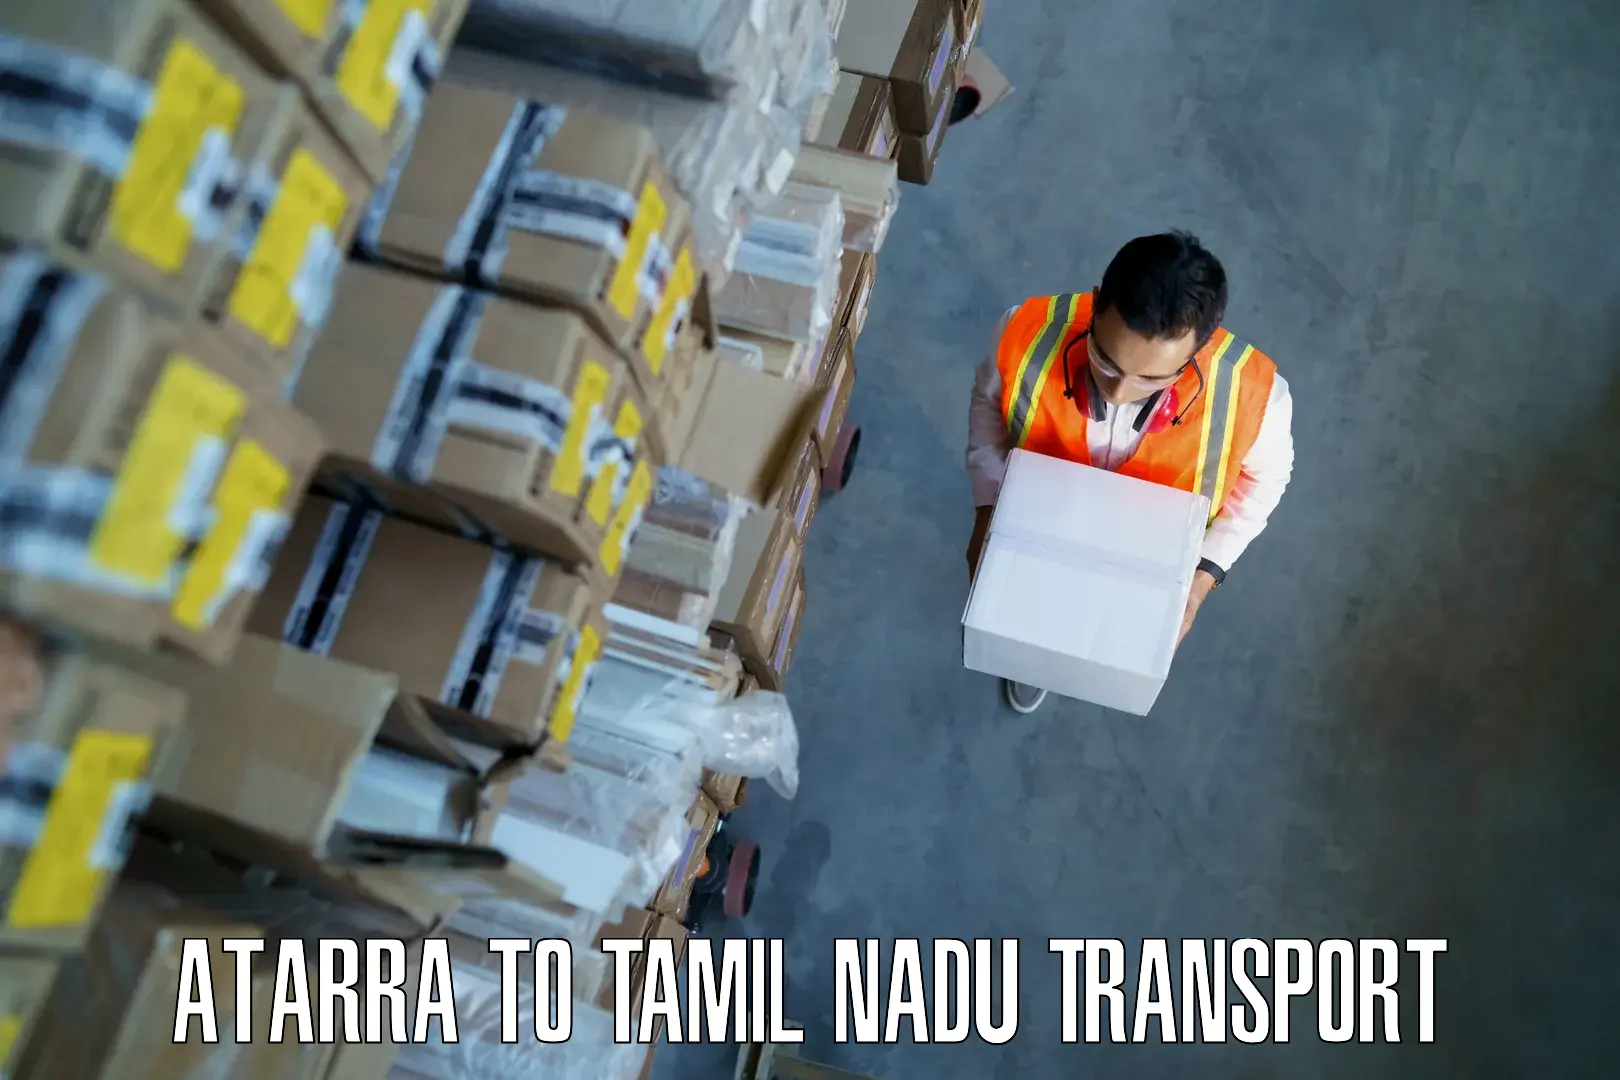 Road transport online services Atarra to Kulittalai